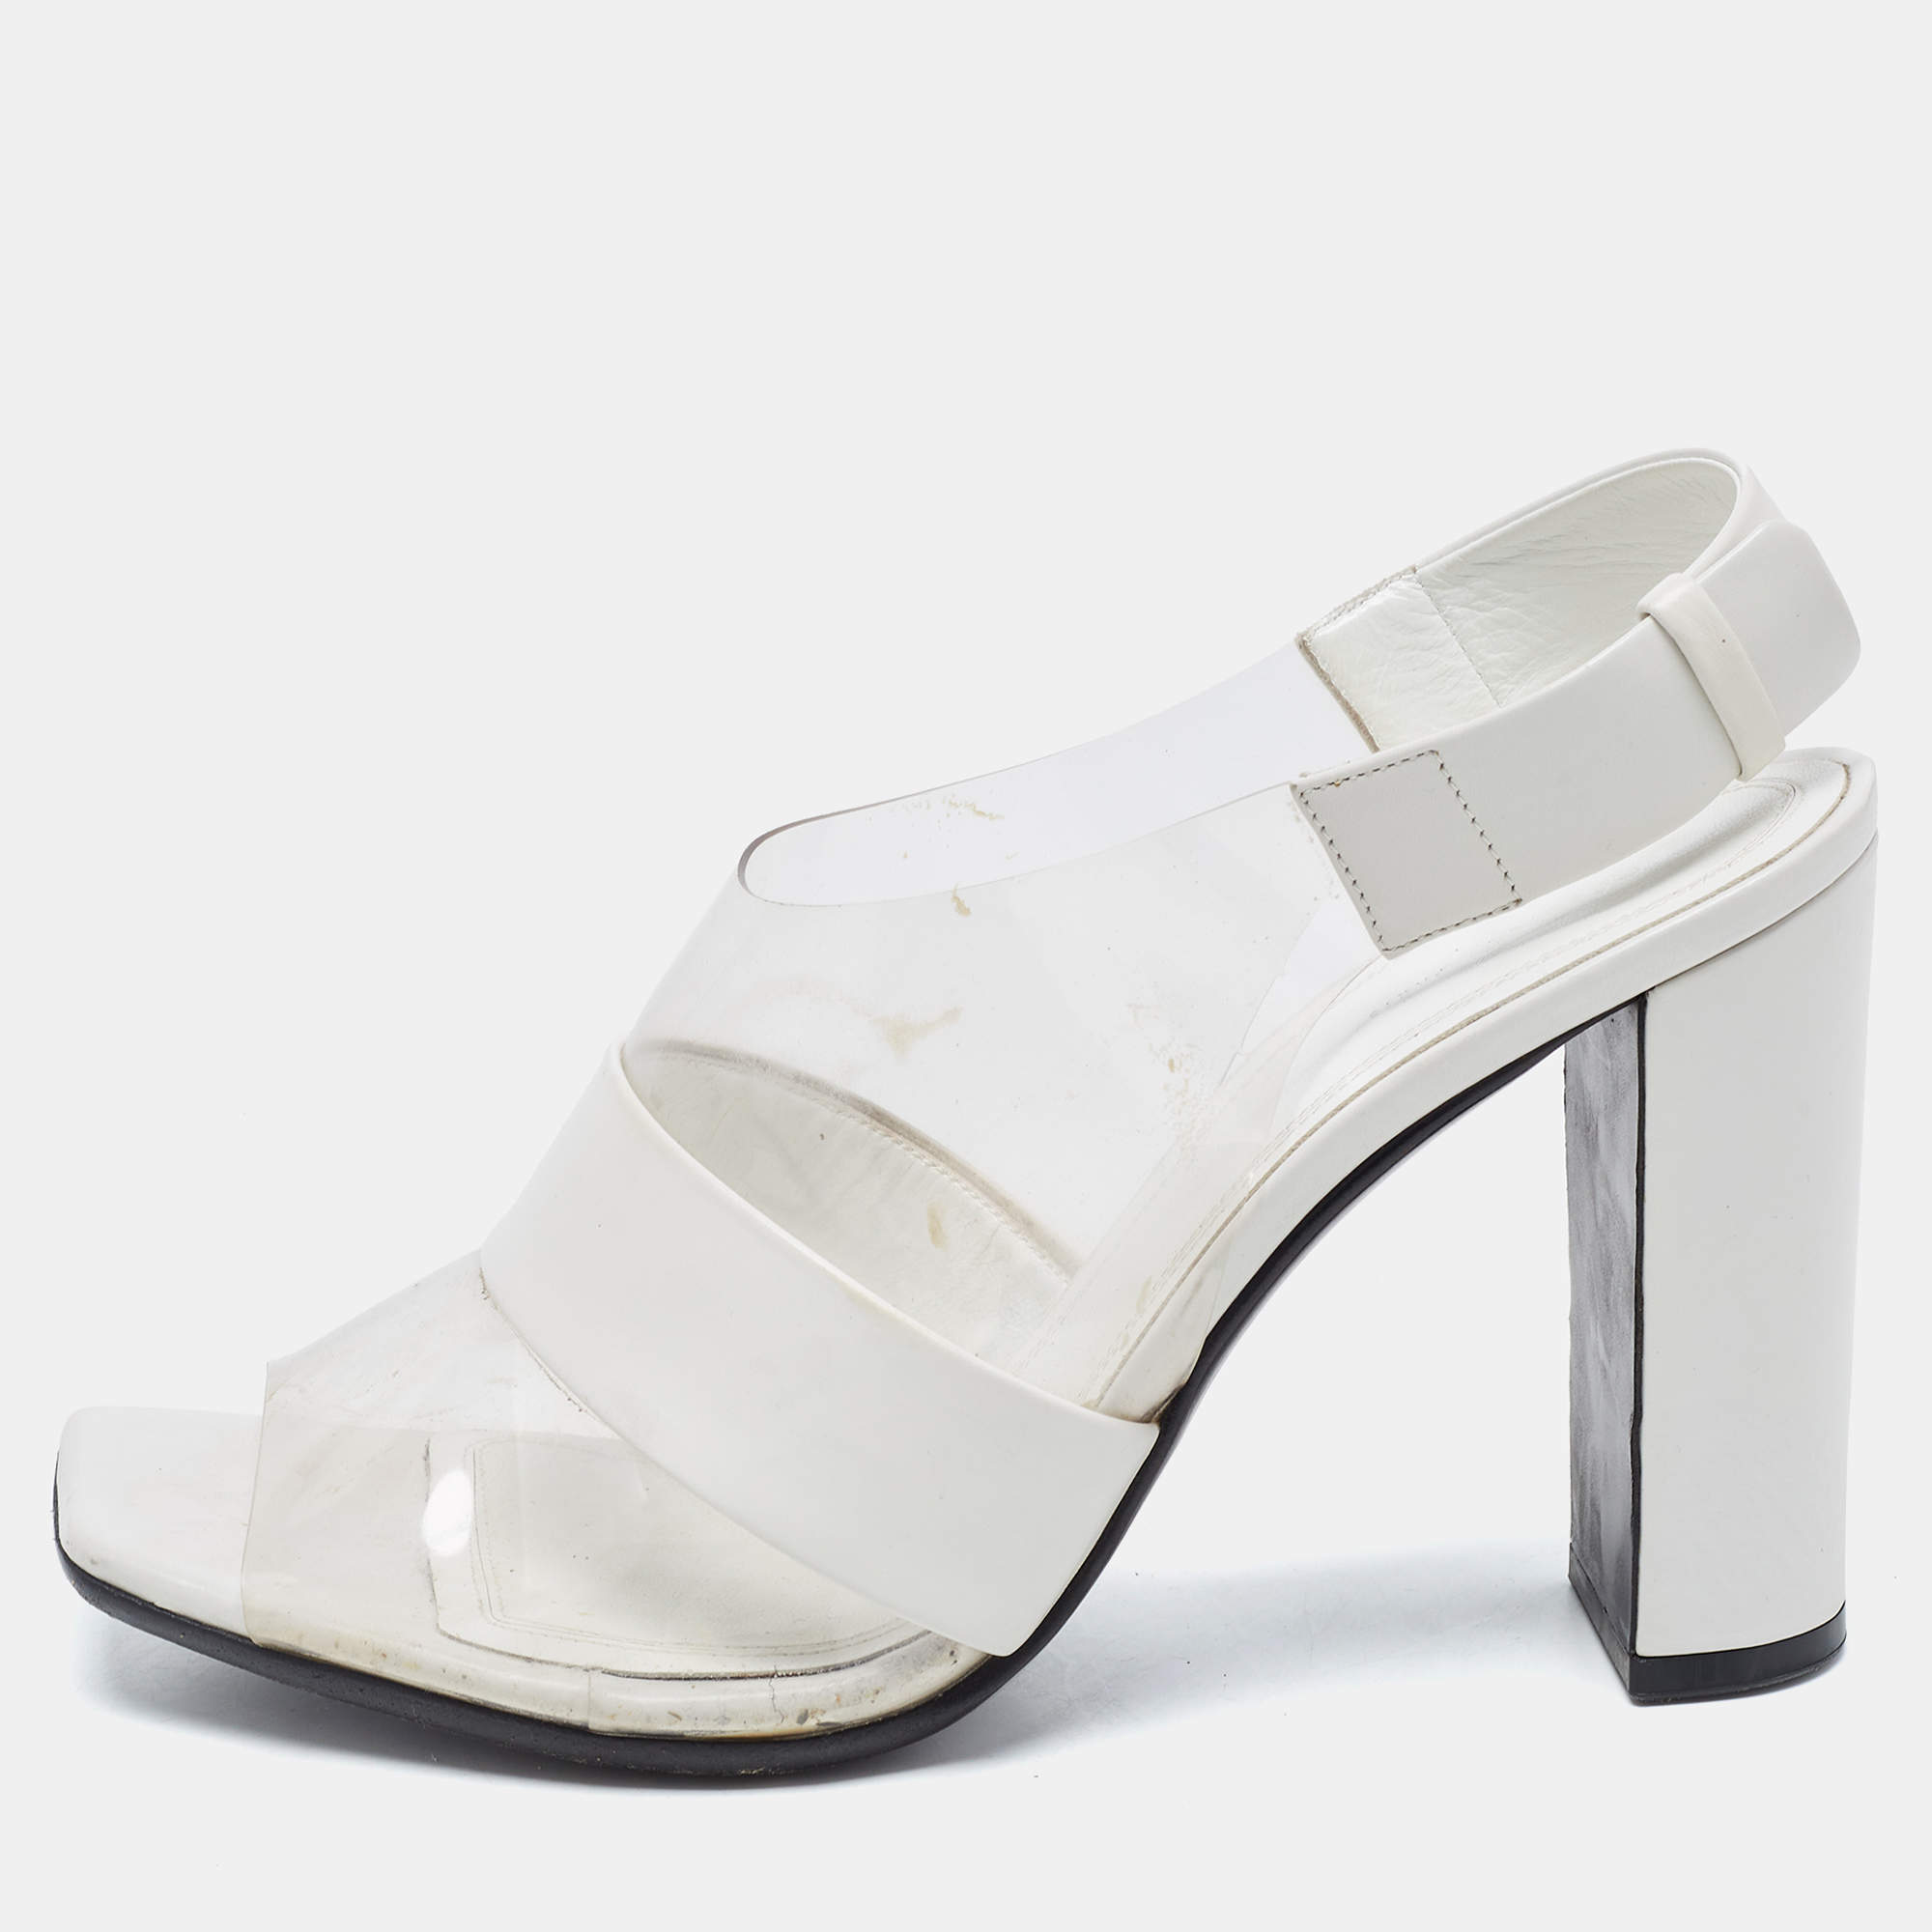 Celine White Leather and PVC Slingback Sandals Size 38